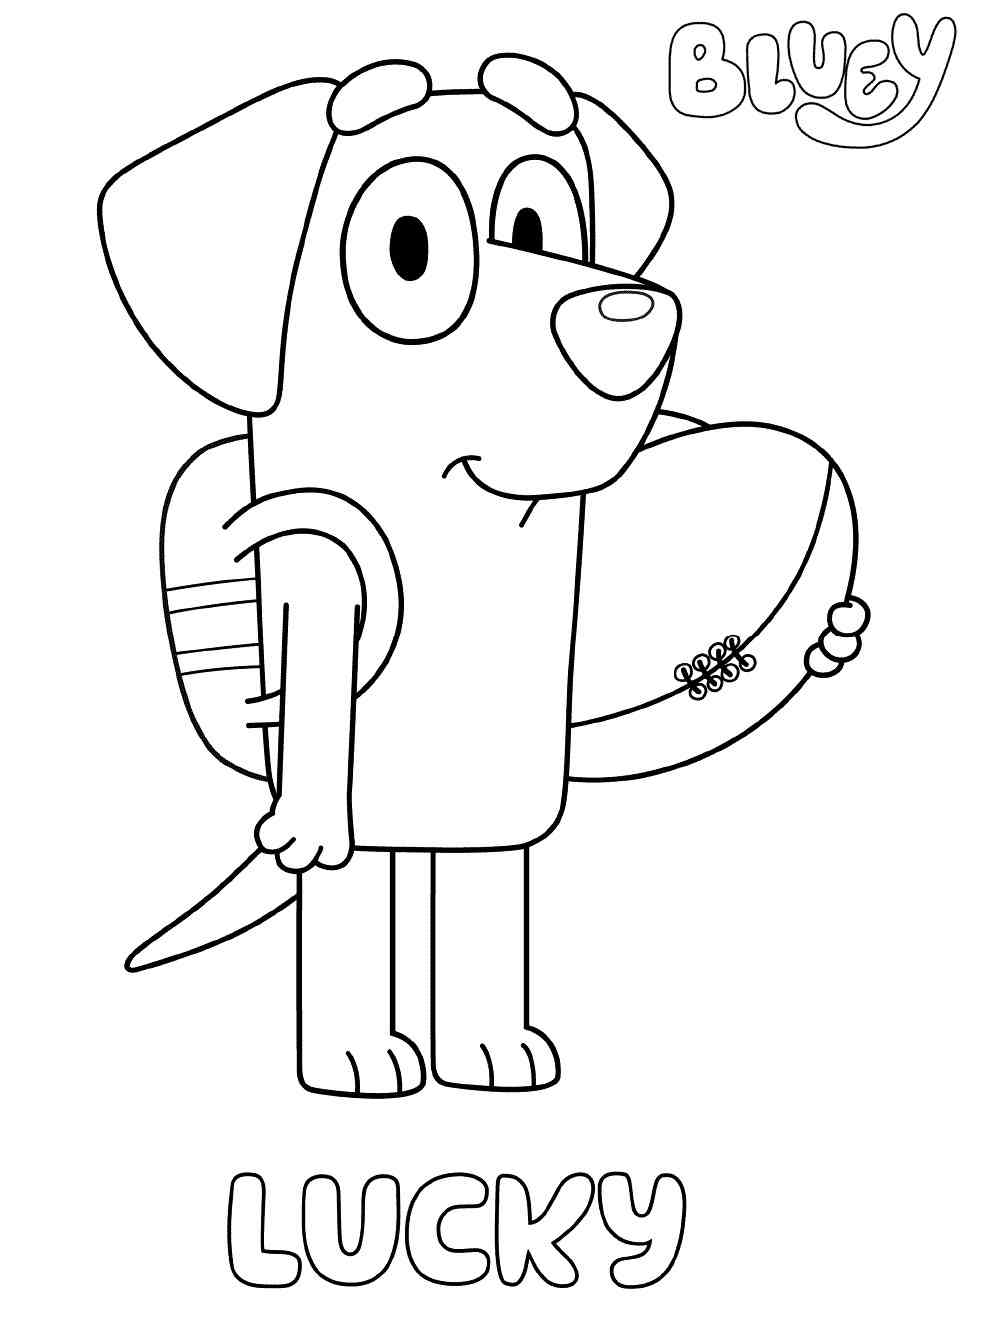 Lucky from Bluey coloring page